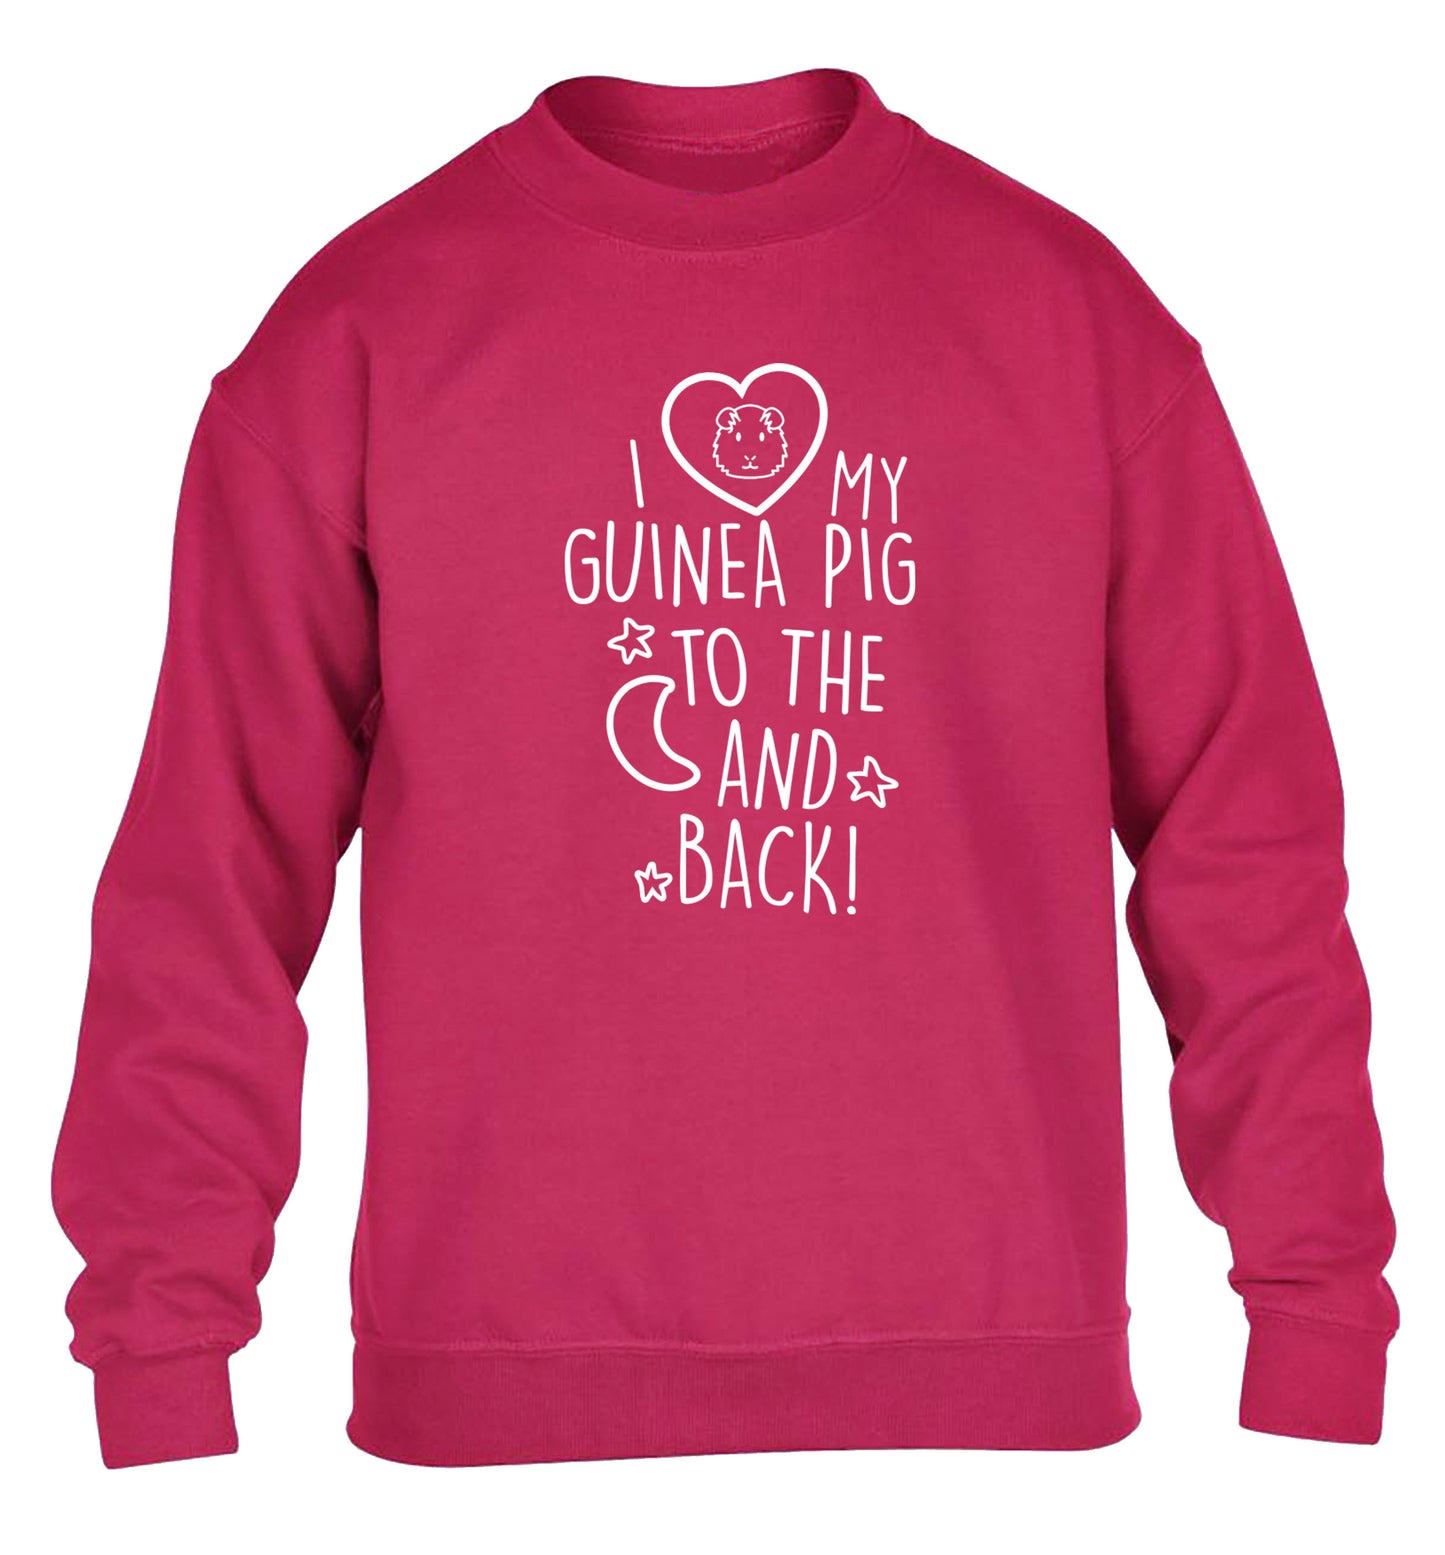 I love my guinea pig to the moon and back children's pink  sweater 12-14 Years